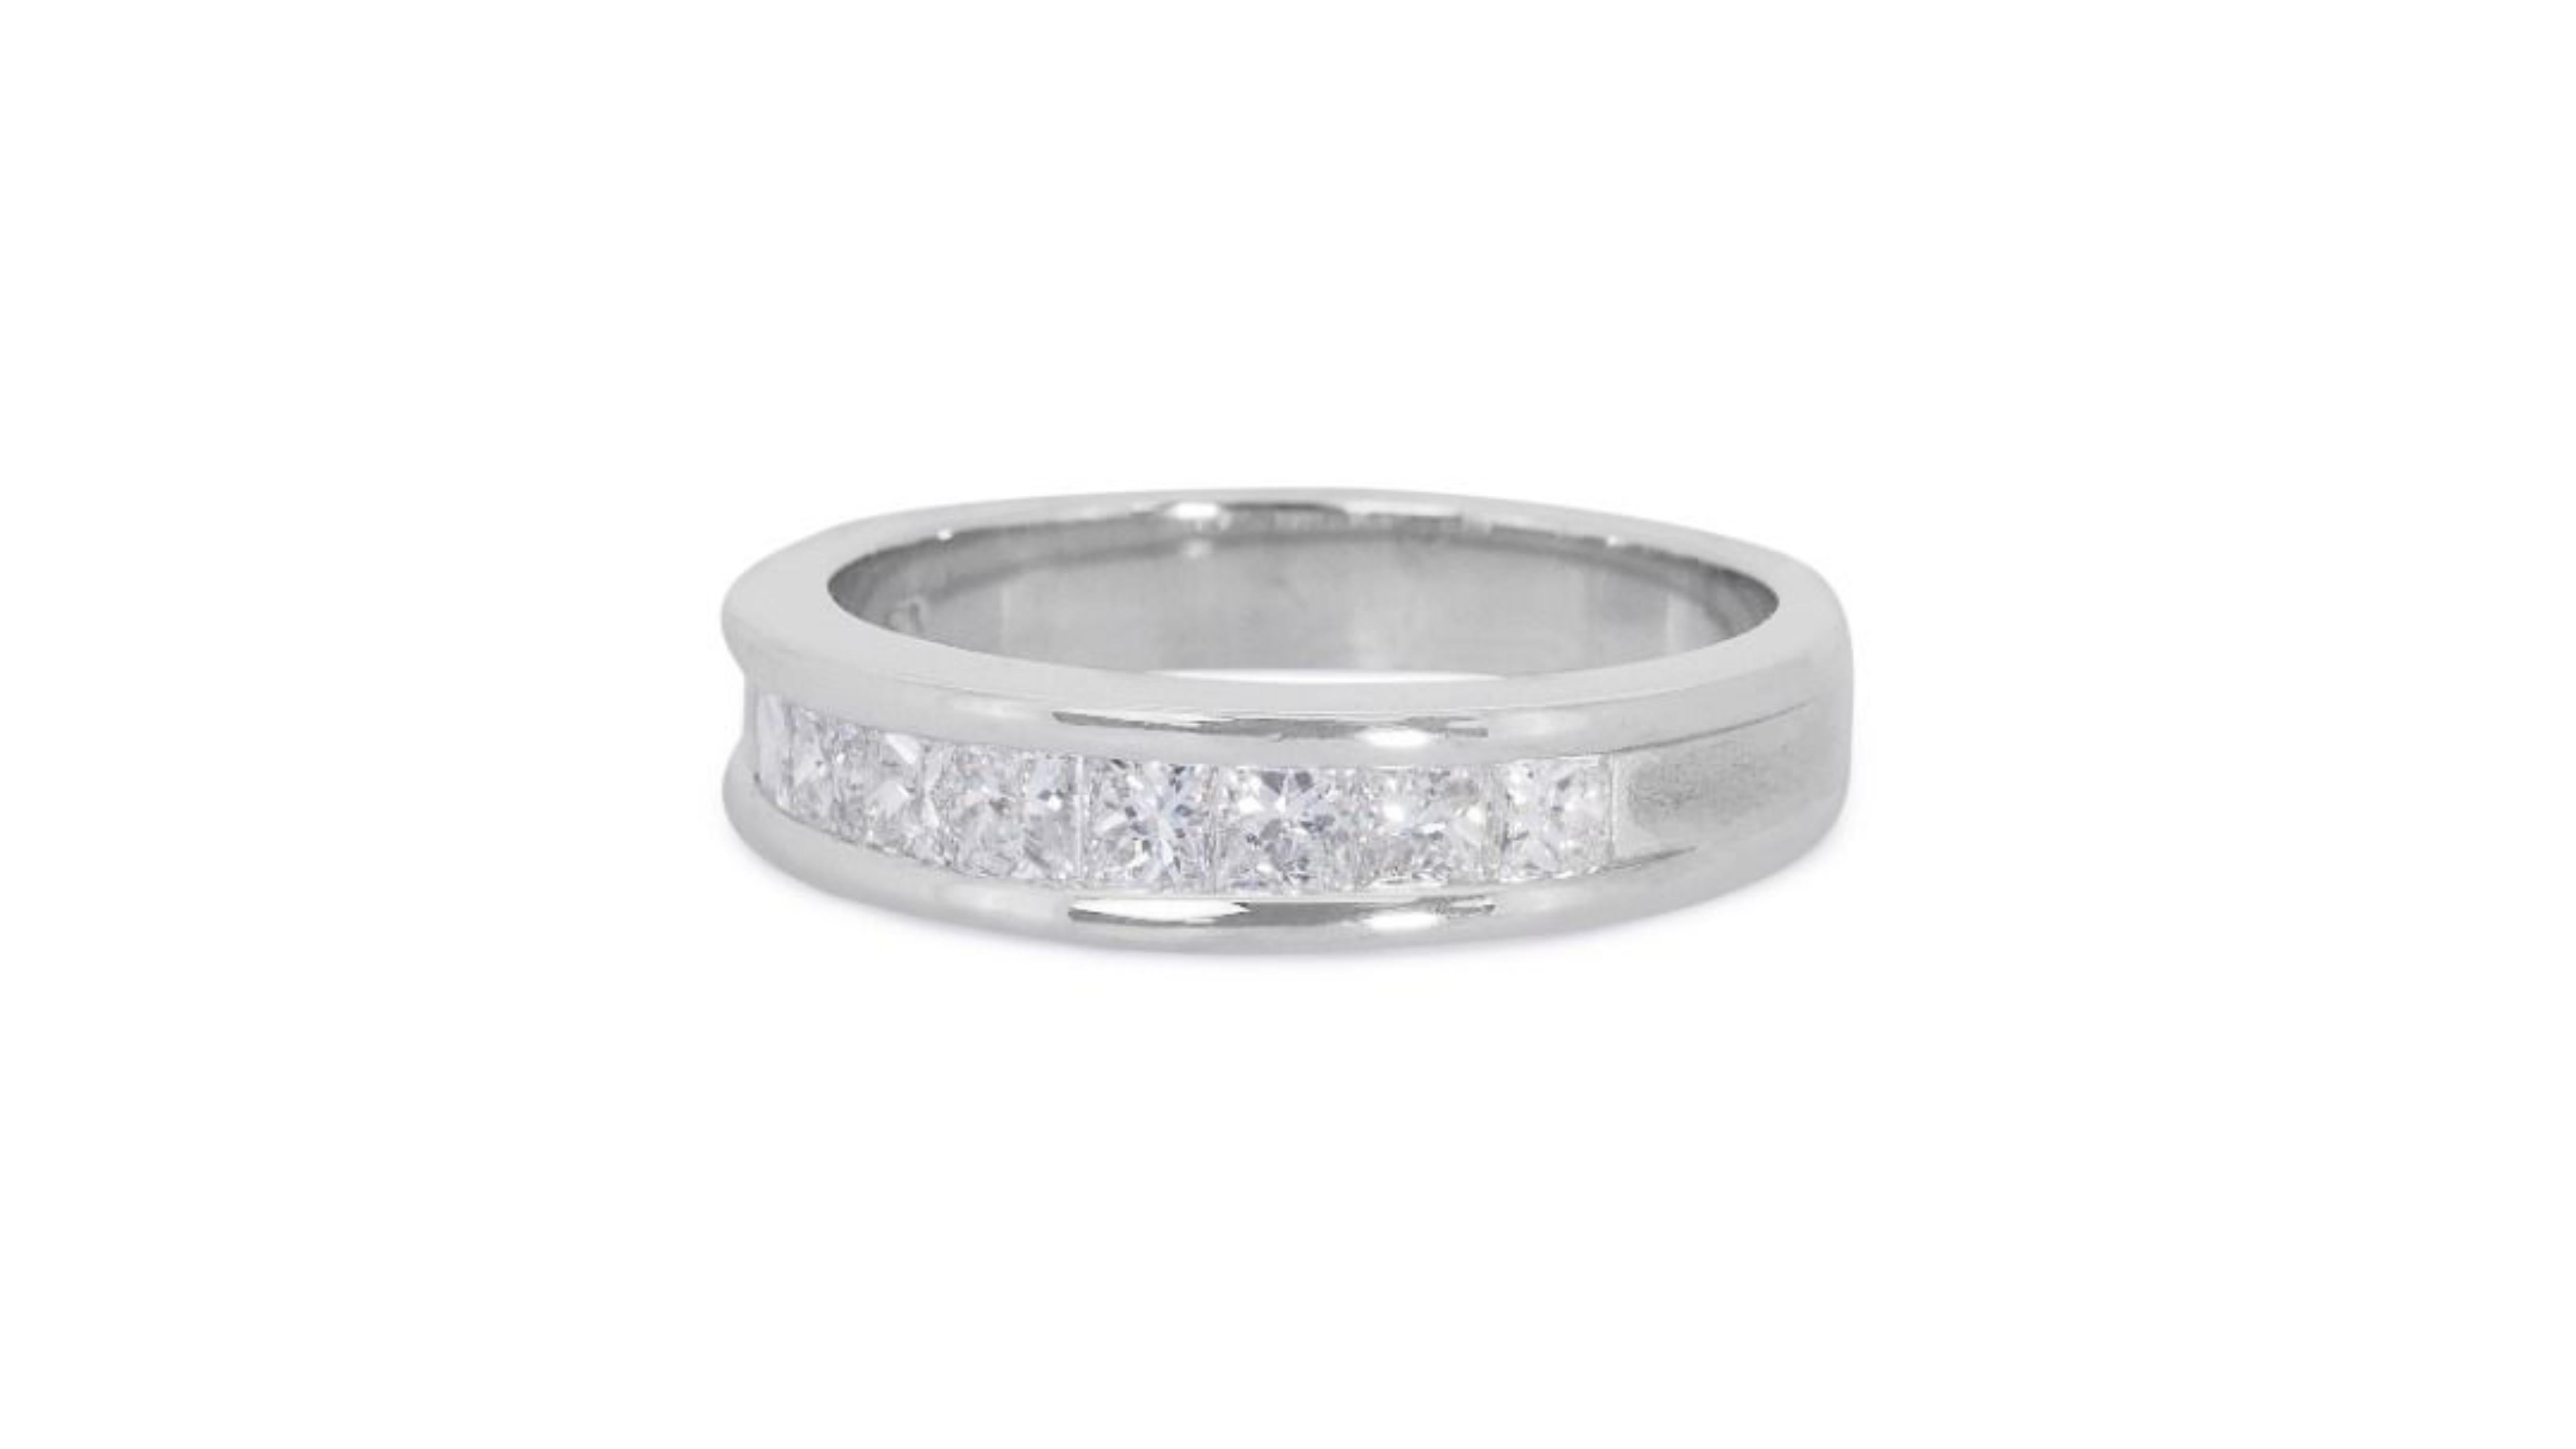 Marvelous 18k White Gold Ring with 1.05ct. Princess Diamond Pave In Excellent Condition For Sale In רמת גן, IL